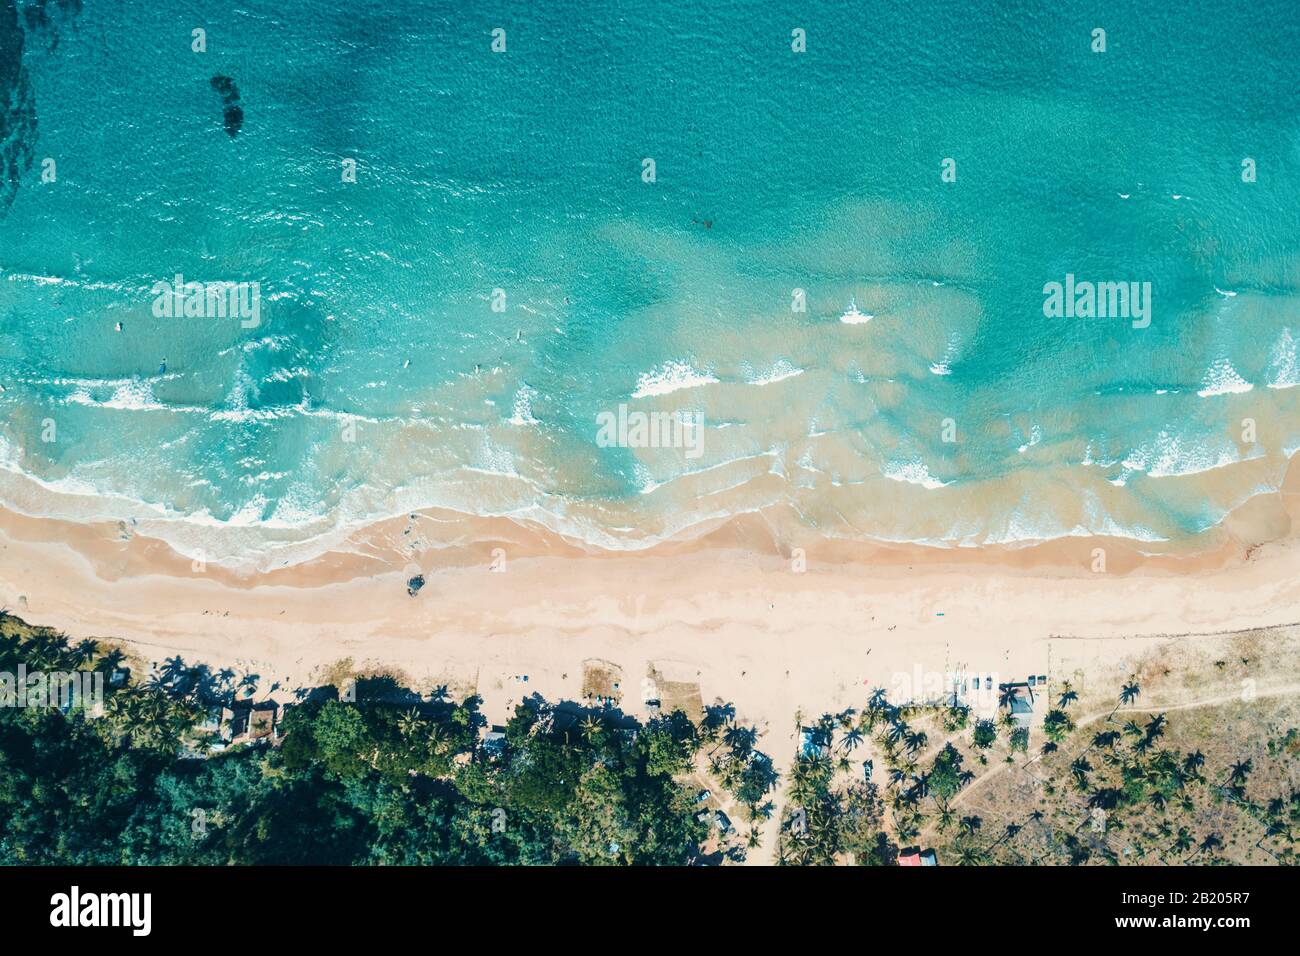 Aerial view to tropical sandy beach and blue ocean. Top view of ocean waves reaching shore on sunny day. Palawan, Philippines. Stock Photo